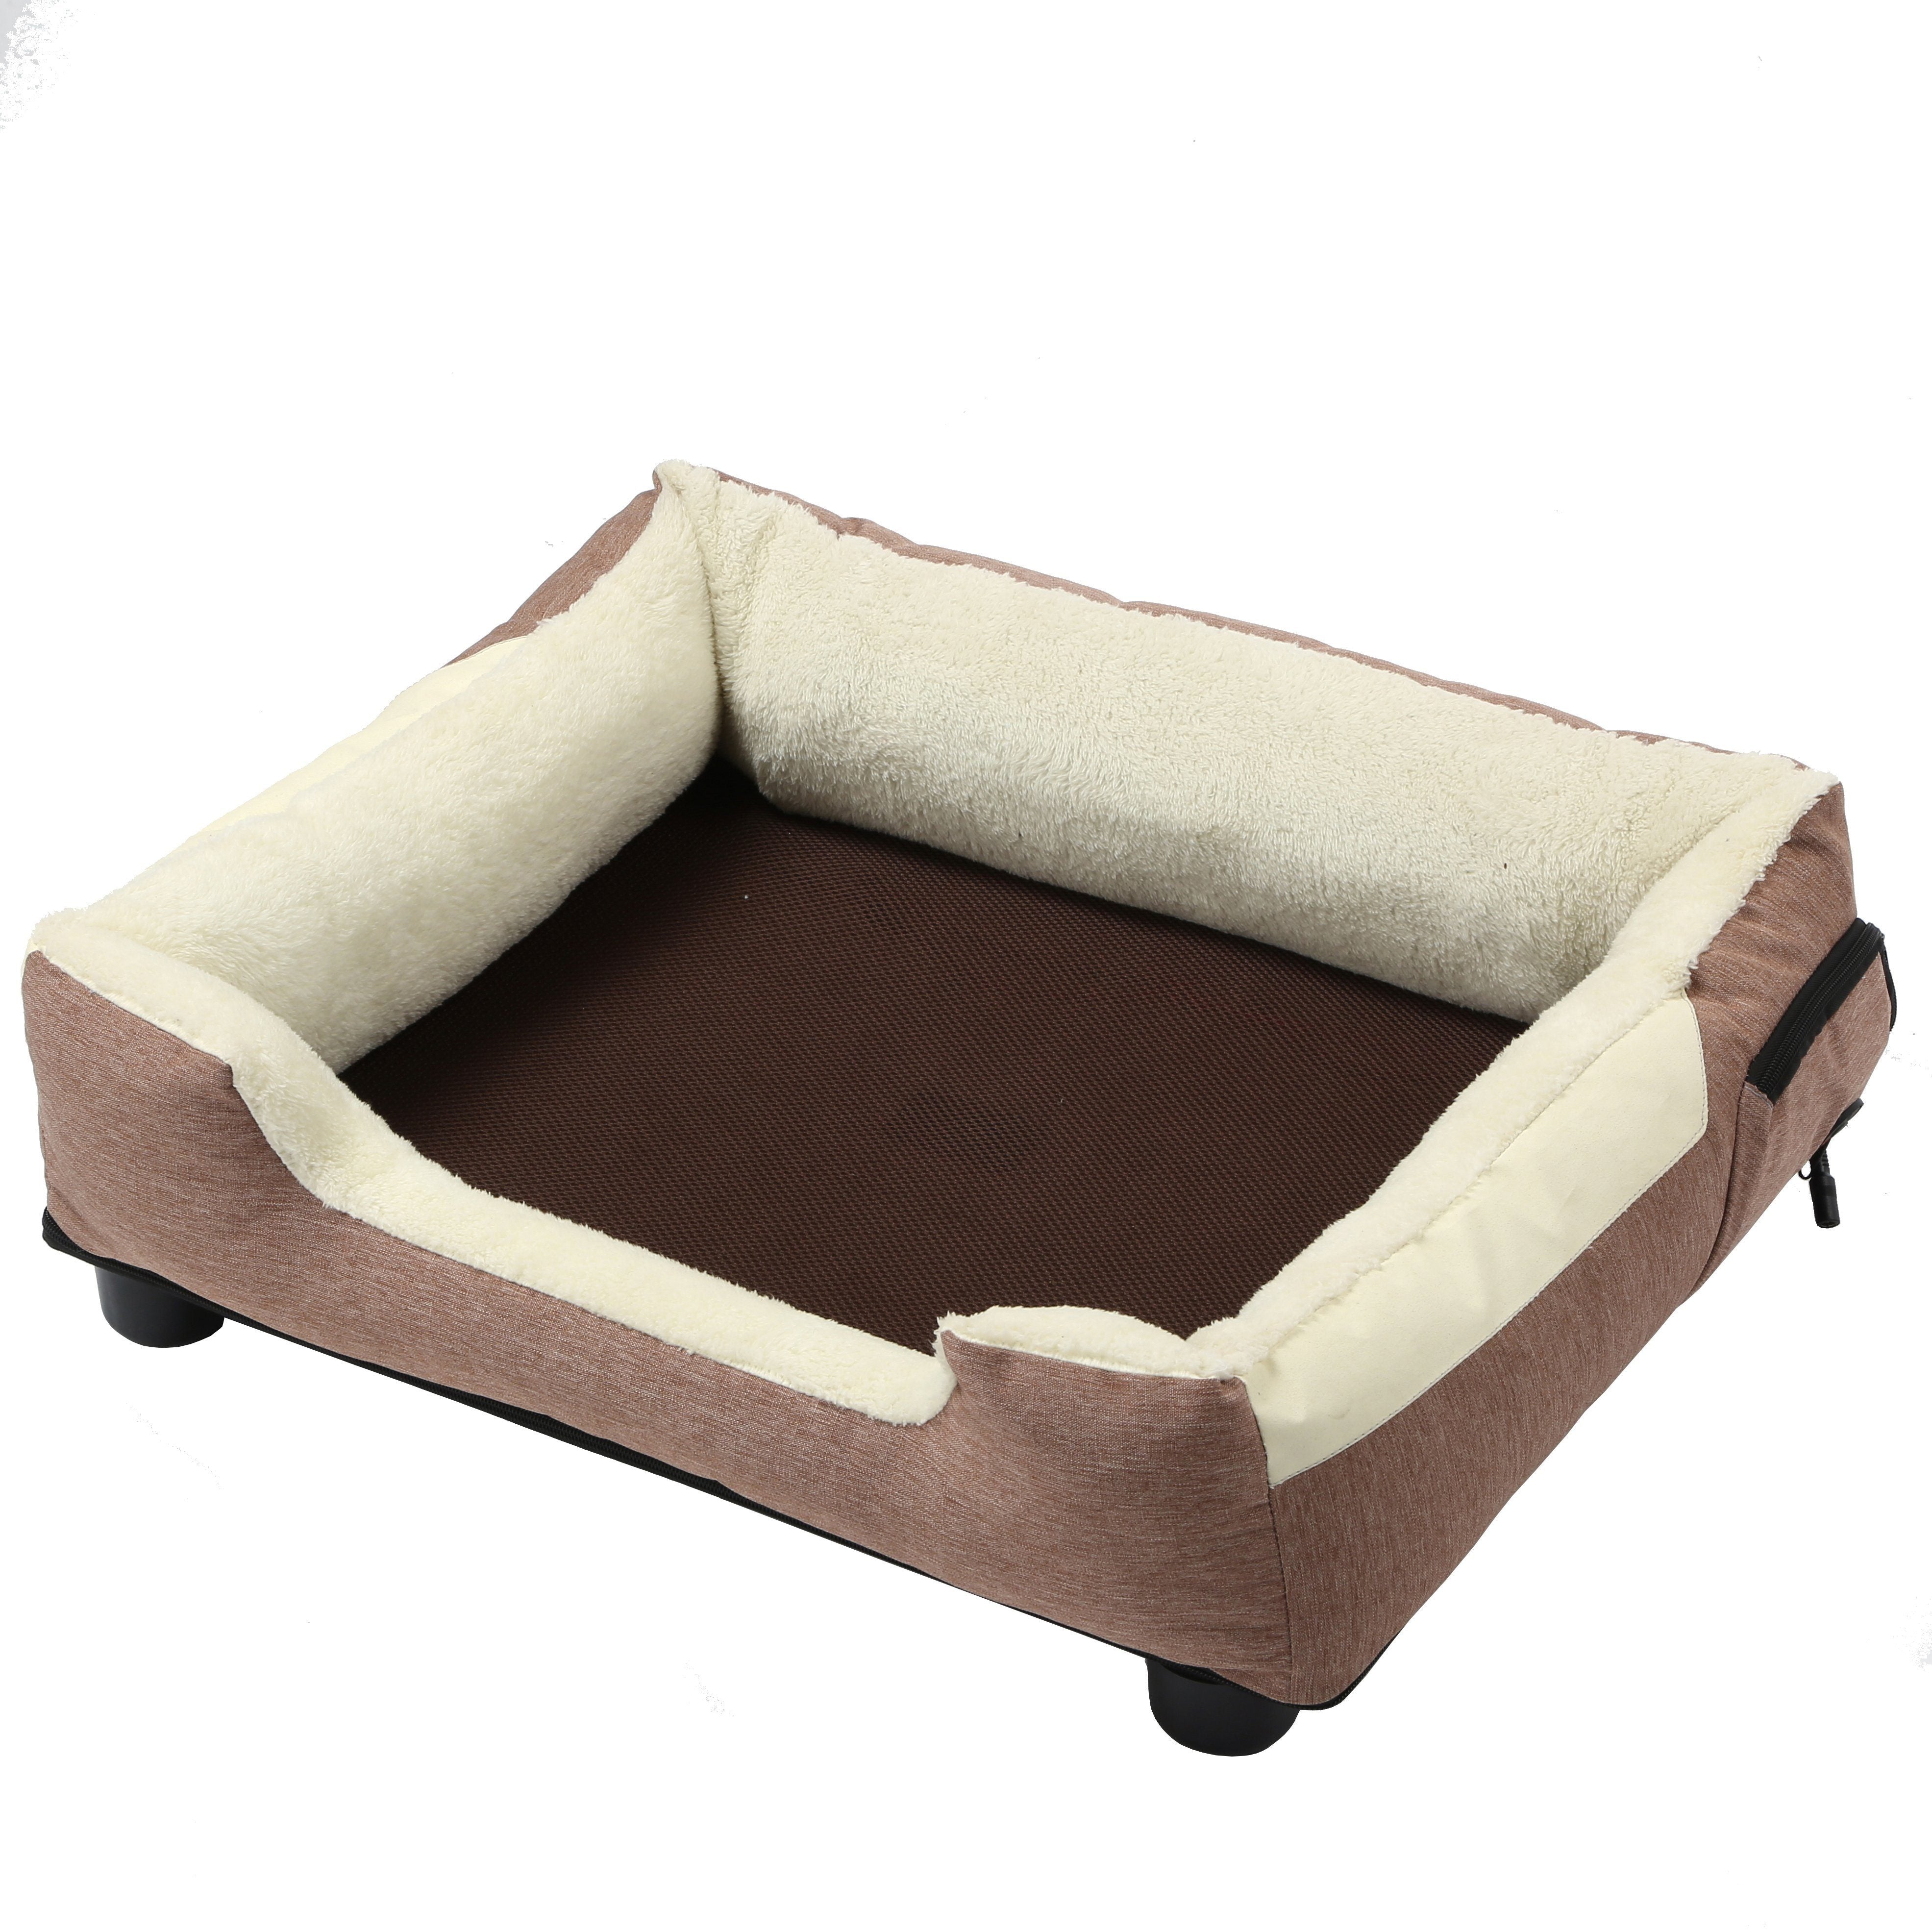 Pet Life "Dream Smart" Electronic Heating and Cooling Smart Dog Bed Medium Mocha Brown